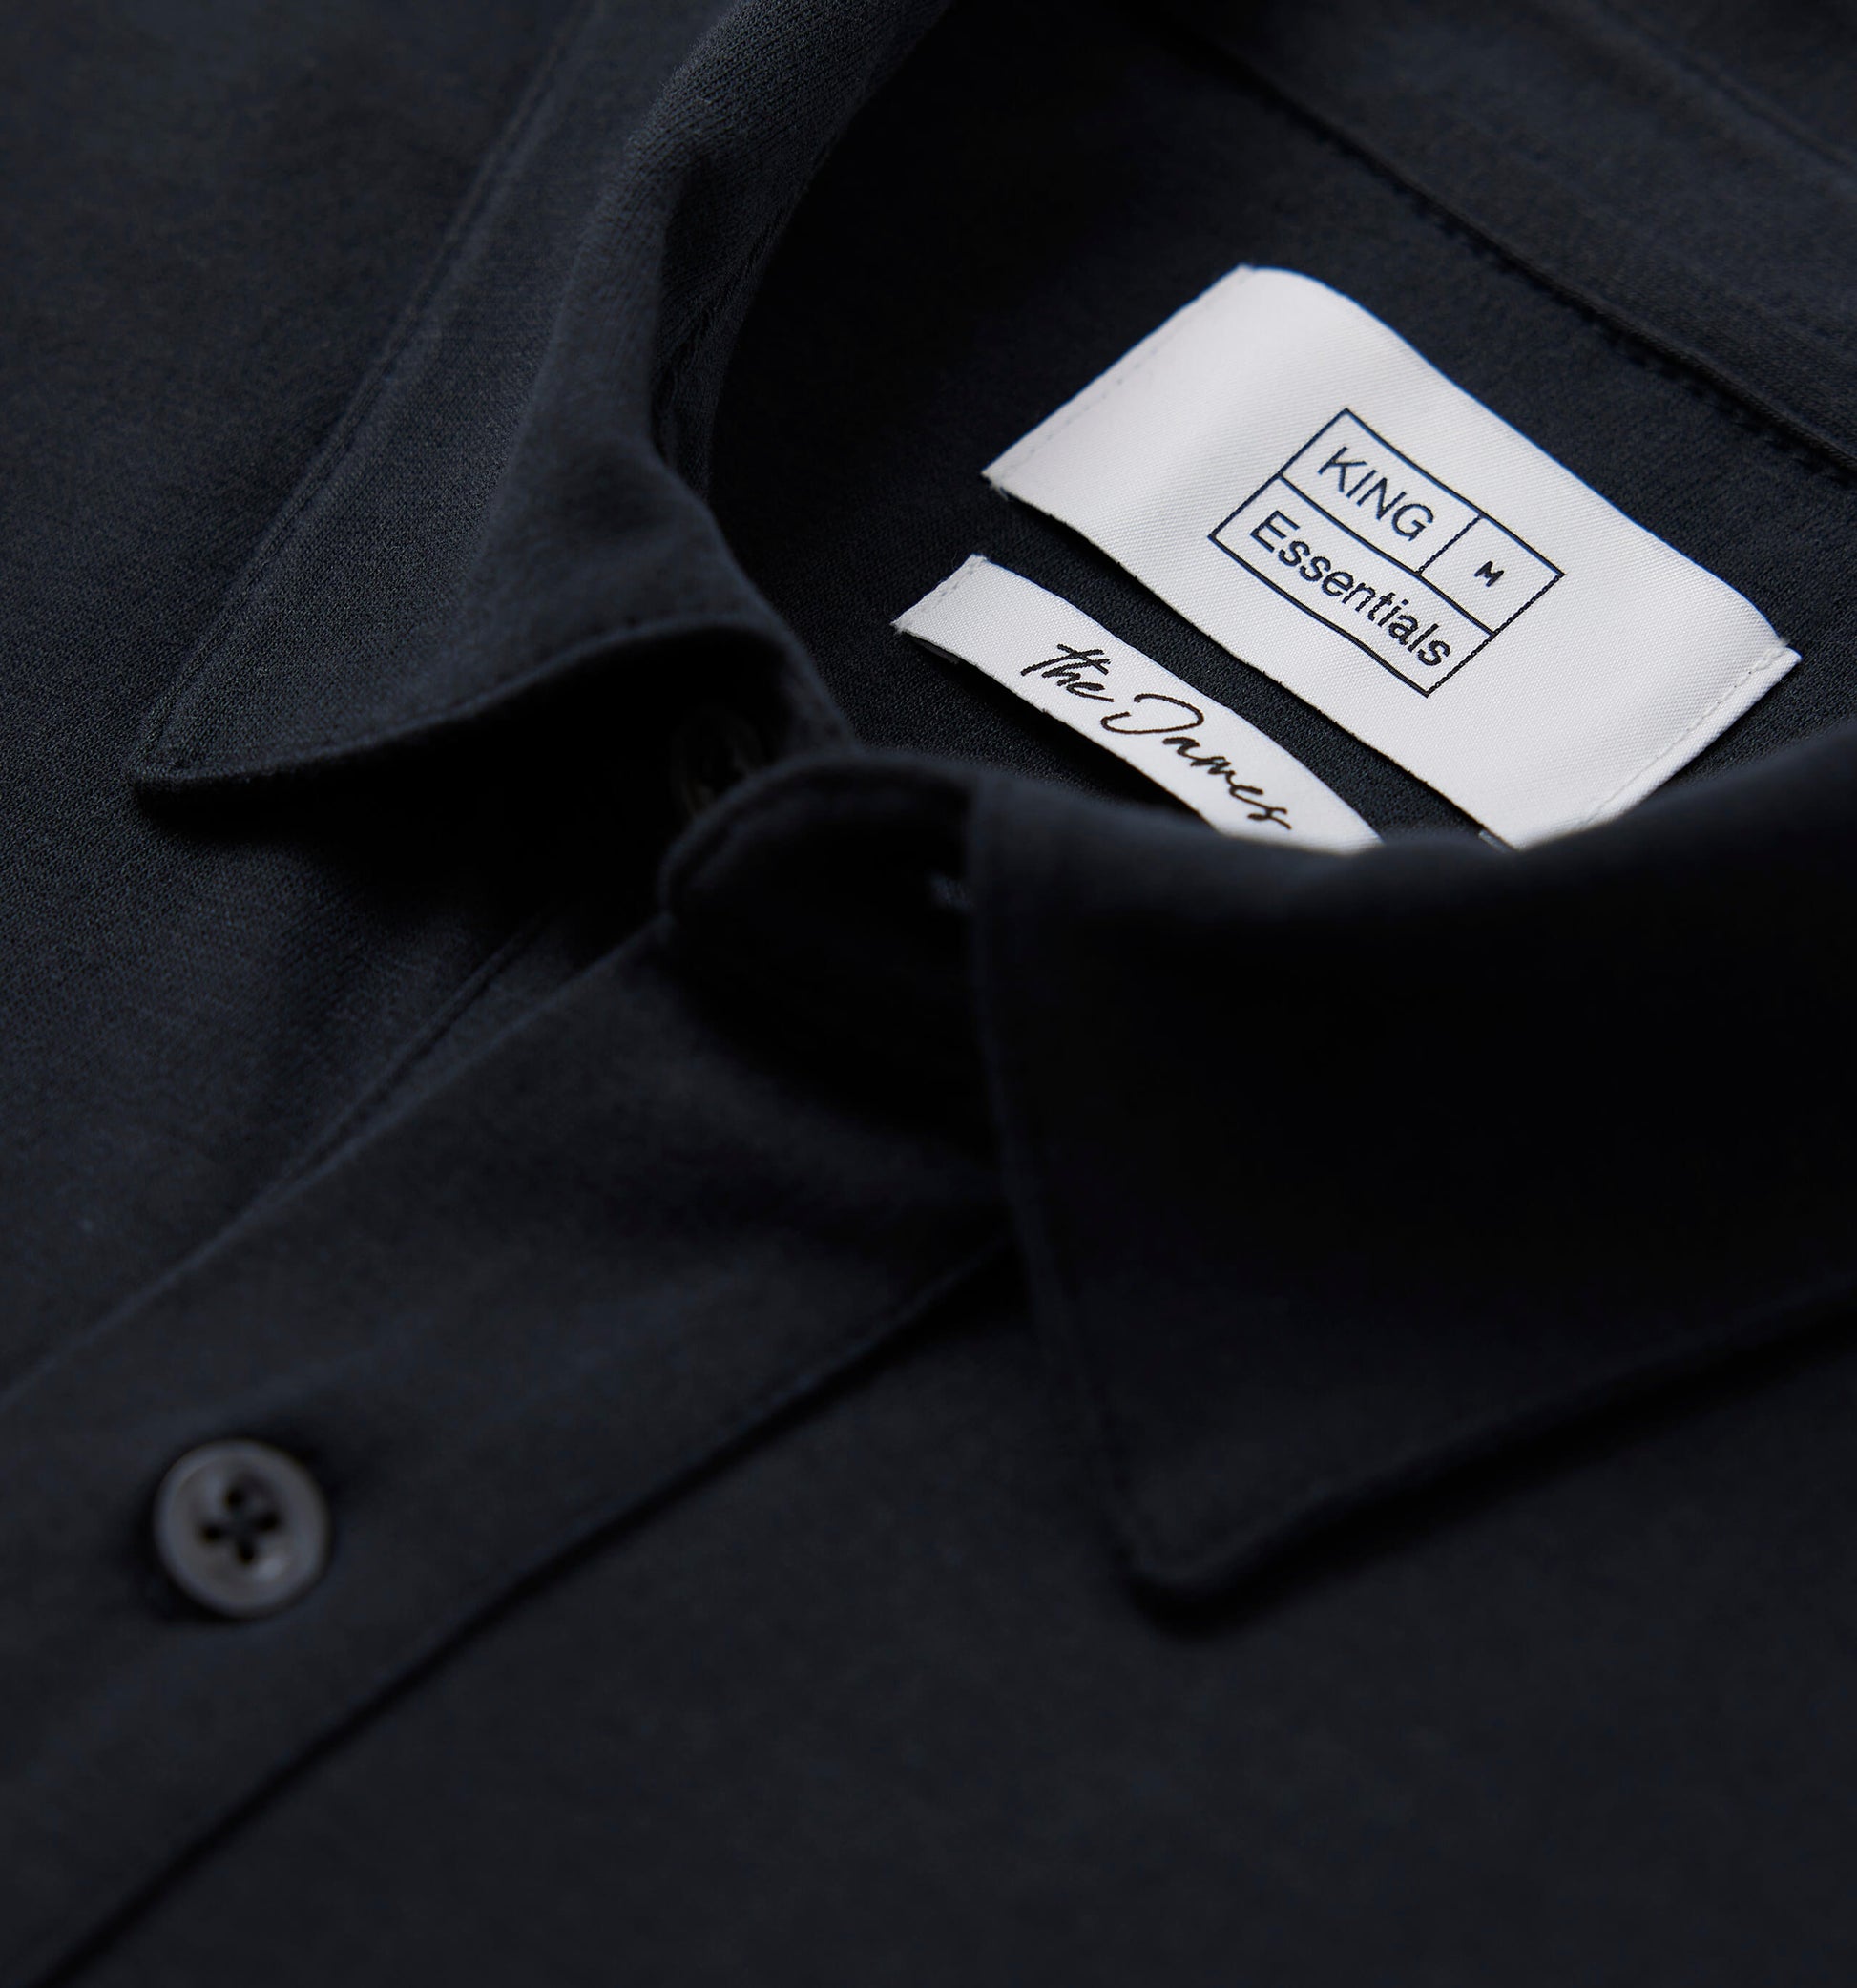 The James - Jersey Cotton Polo In Black From King Essentials